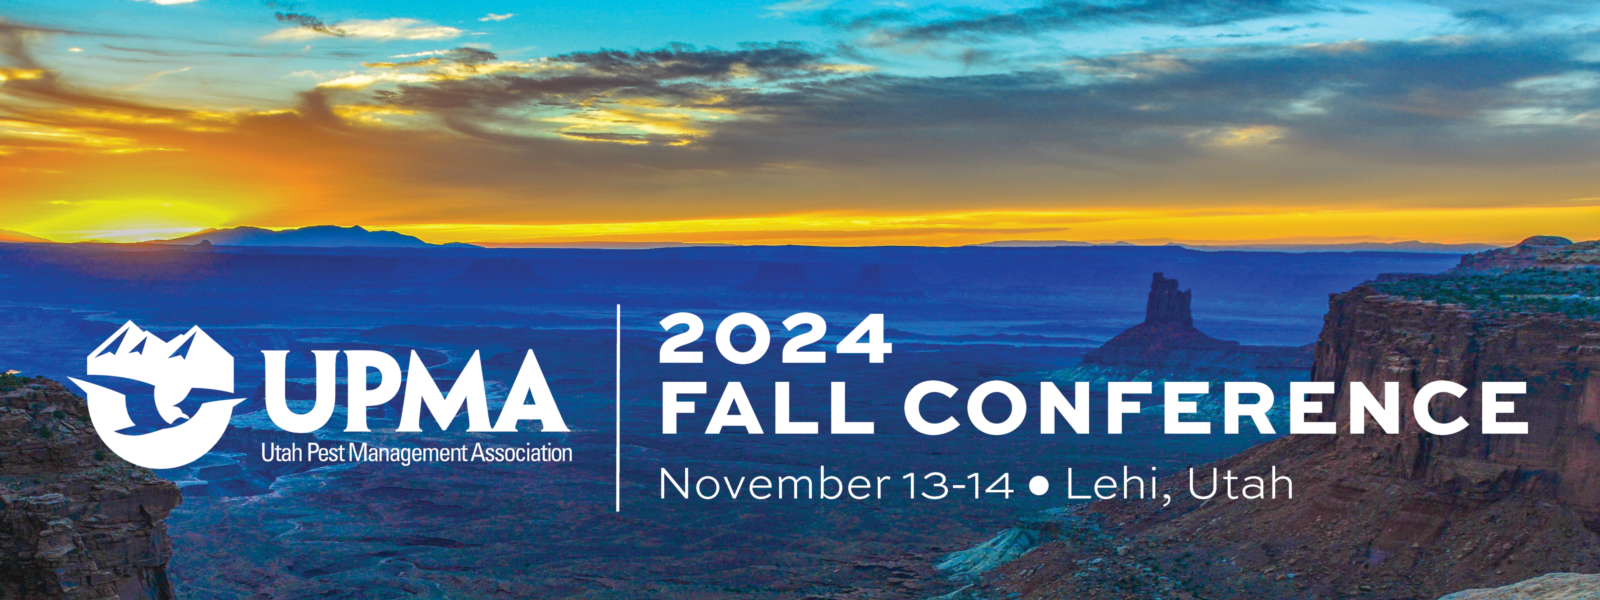 UPMA 2024 Fall Conference Banner.png